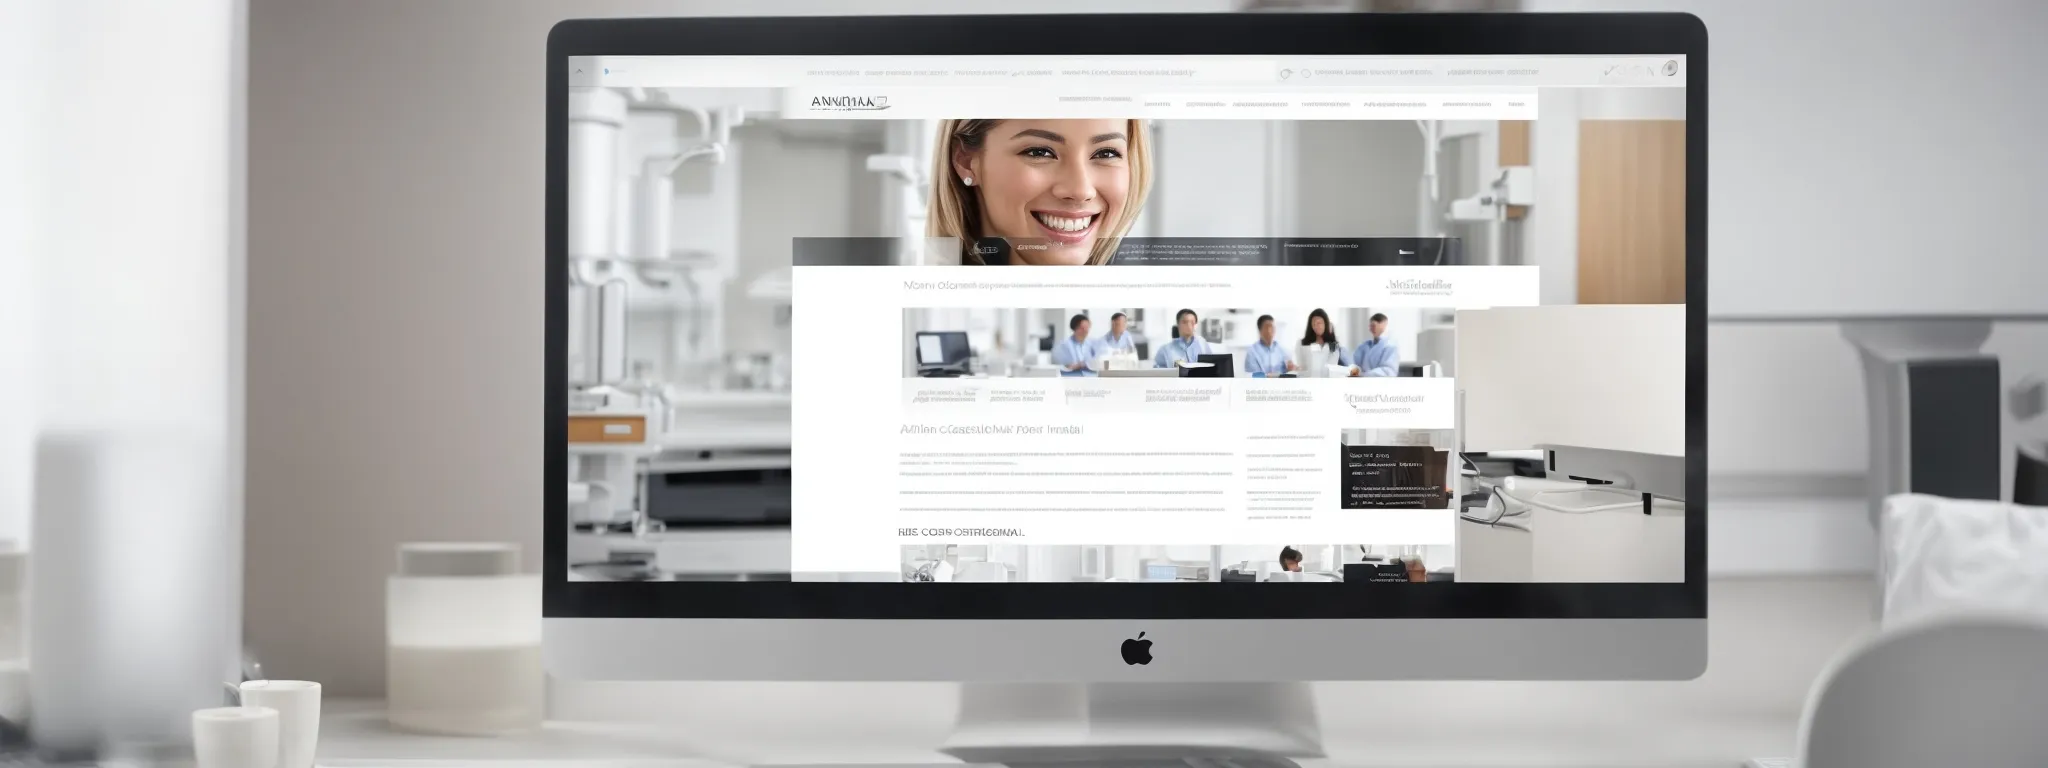 a computer screen displays a dental clinic's website featuring a smiling dentist, with focus on a search bar and visible url, set within a clean, modern office environment.